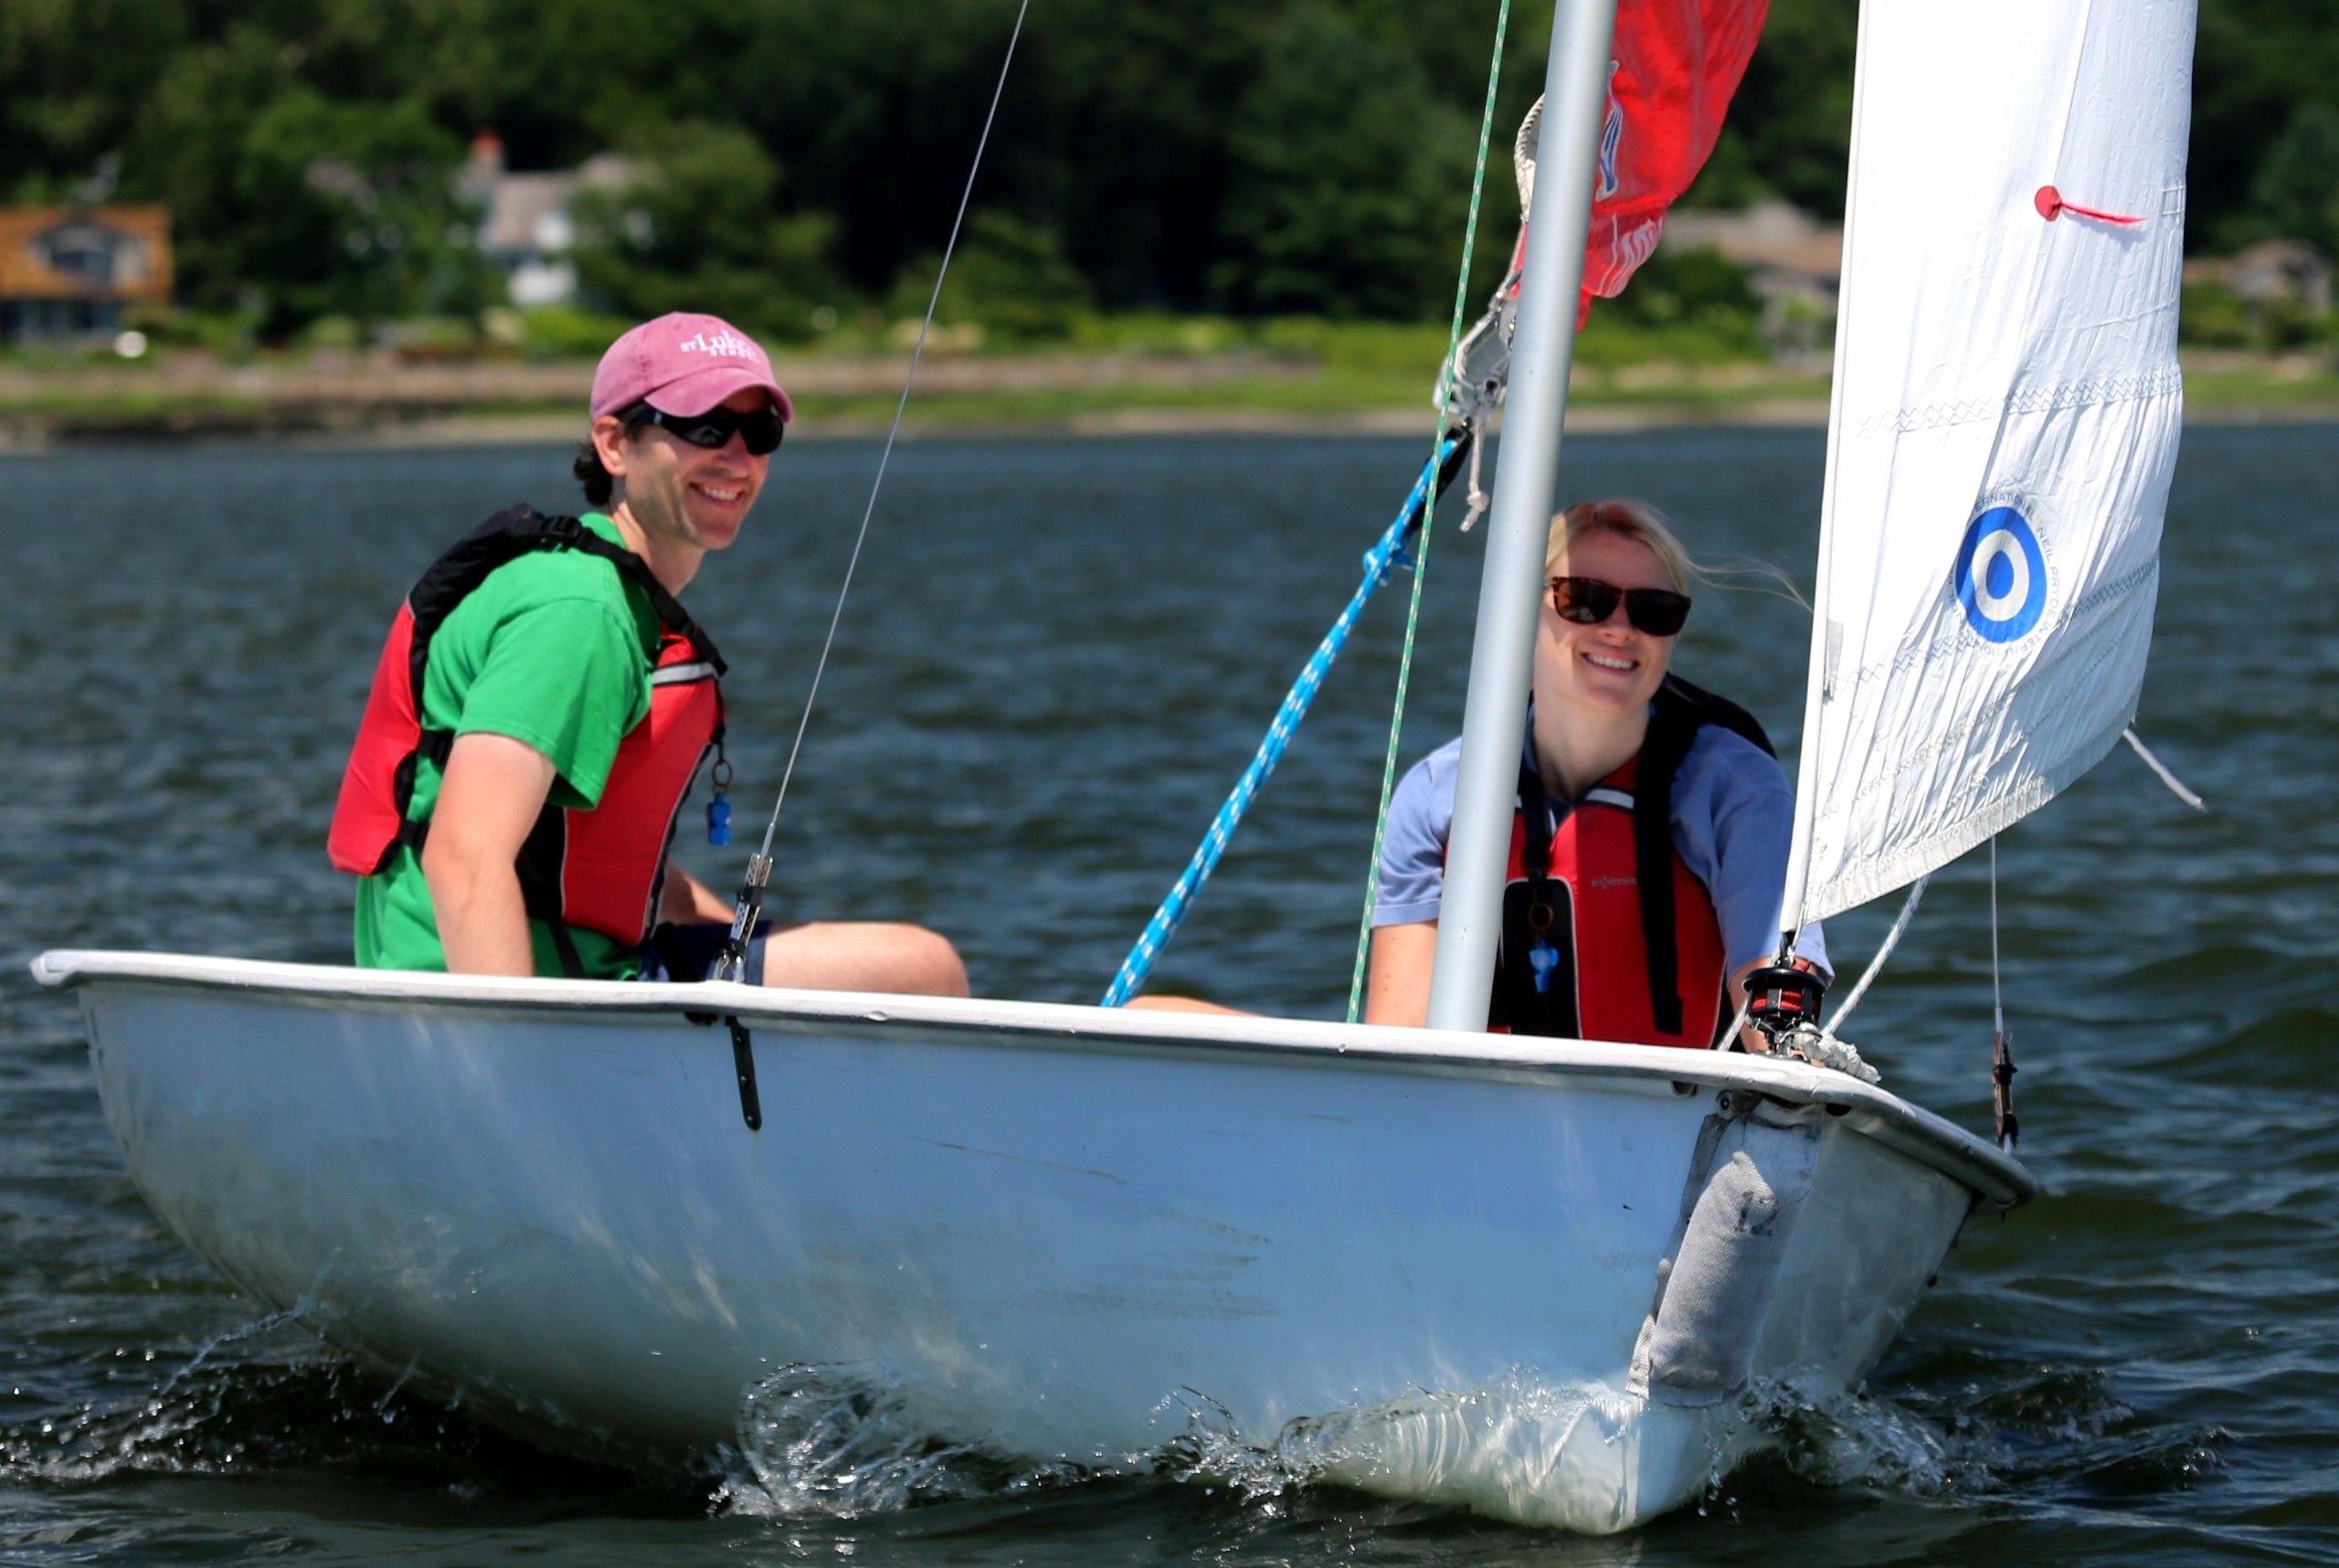 The Adult Sailing Program includes Basic, Intermediate, and Advanced courses for students ages 17 and up.